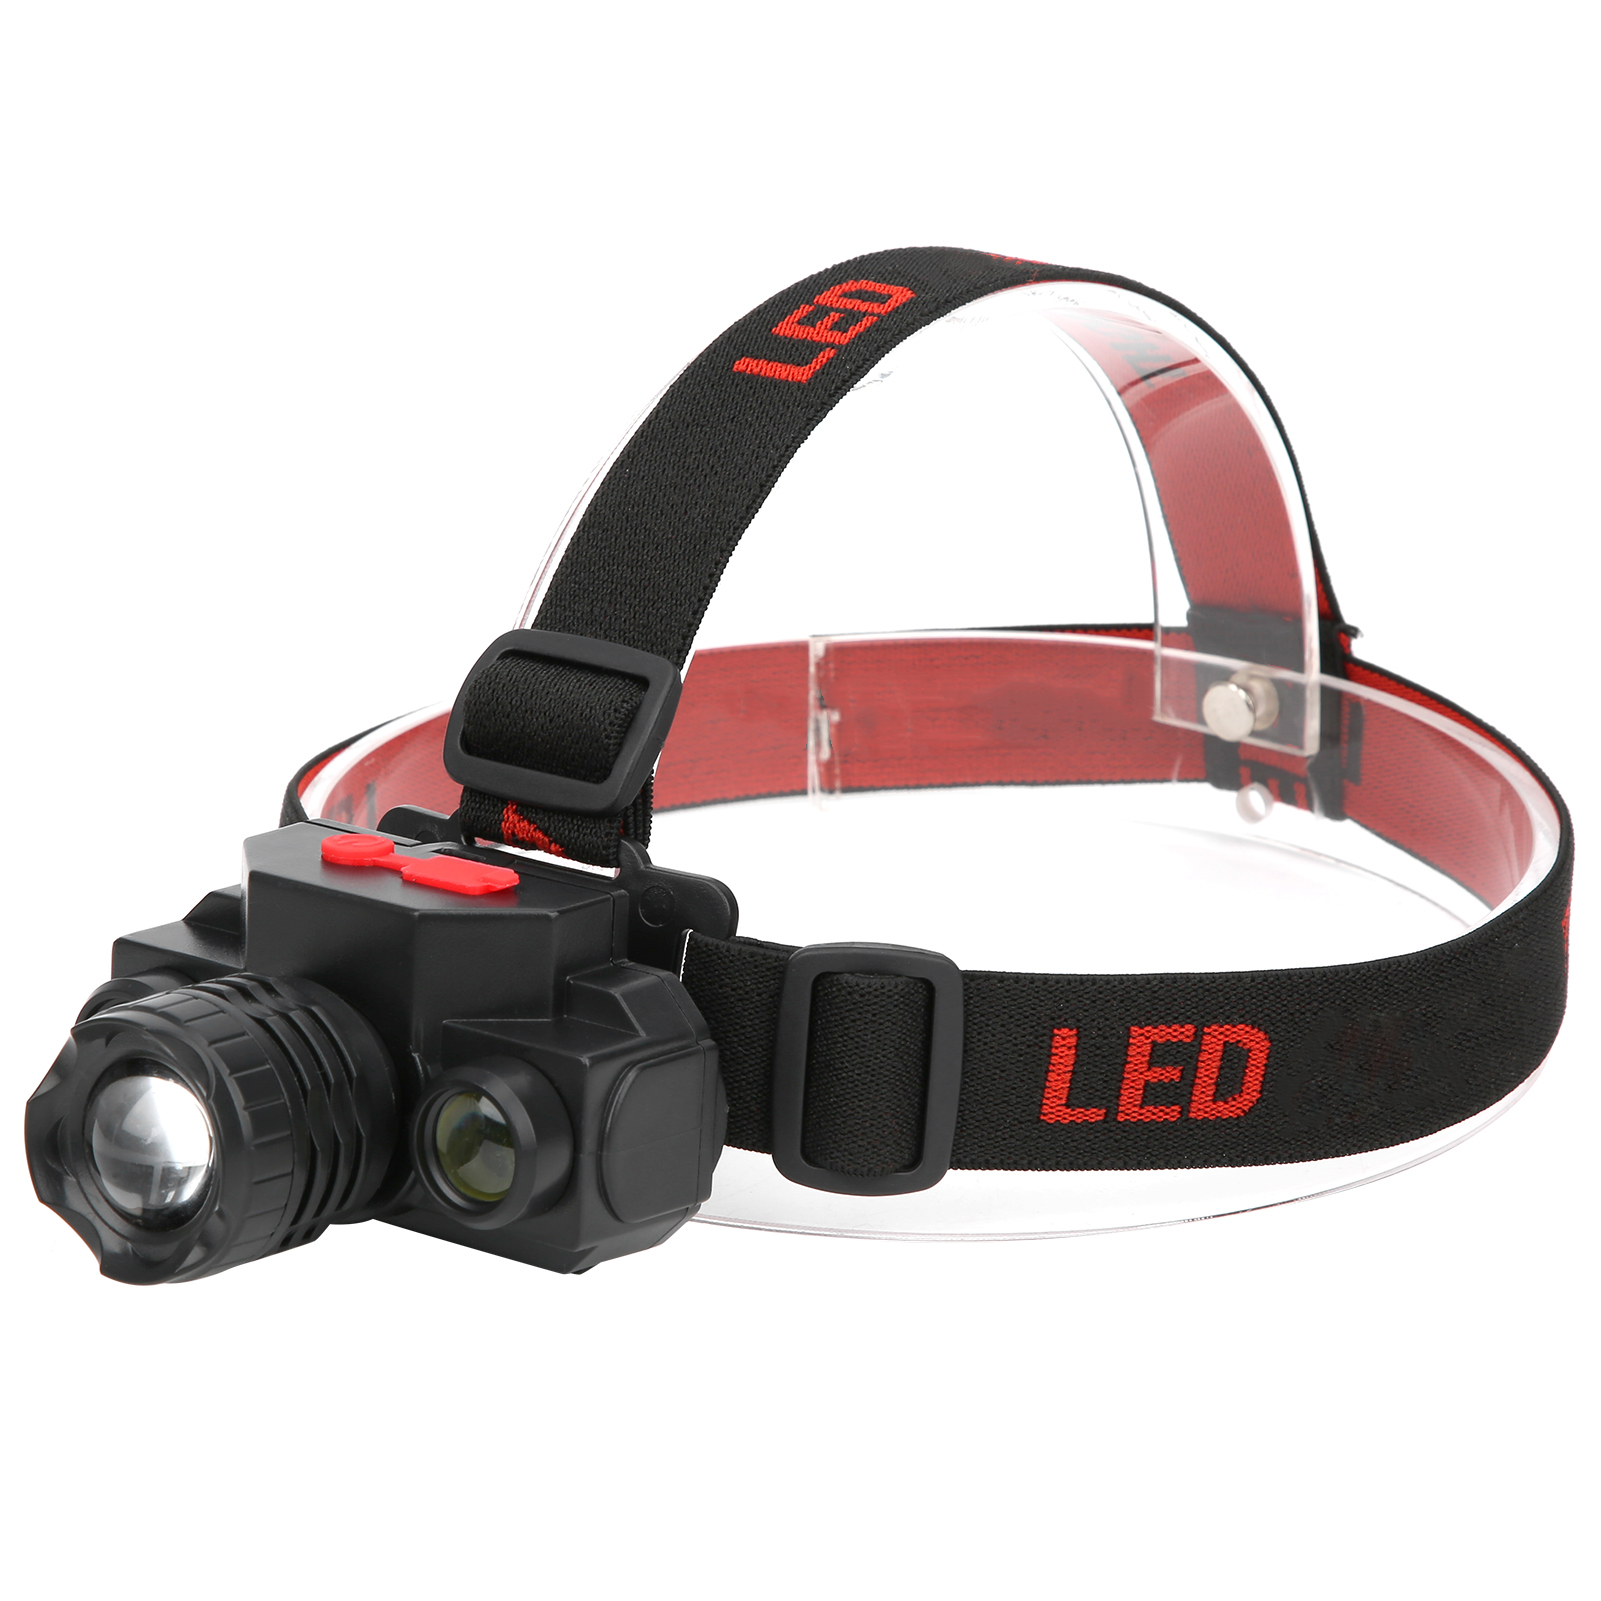 Herwey LED Headlamp Headband Light USB Rechargeable Jogging Outdoor Camping  Supplies T6